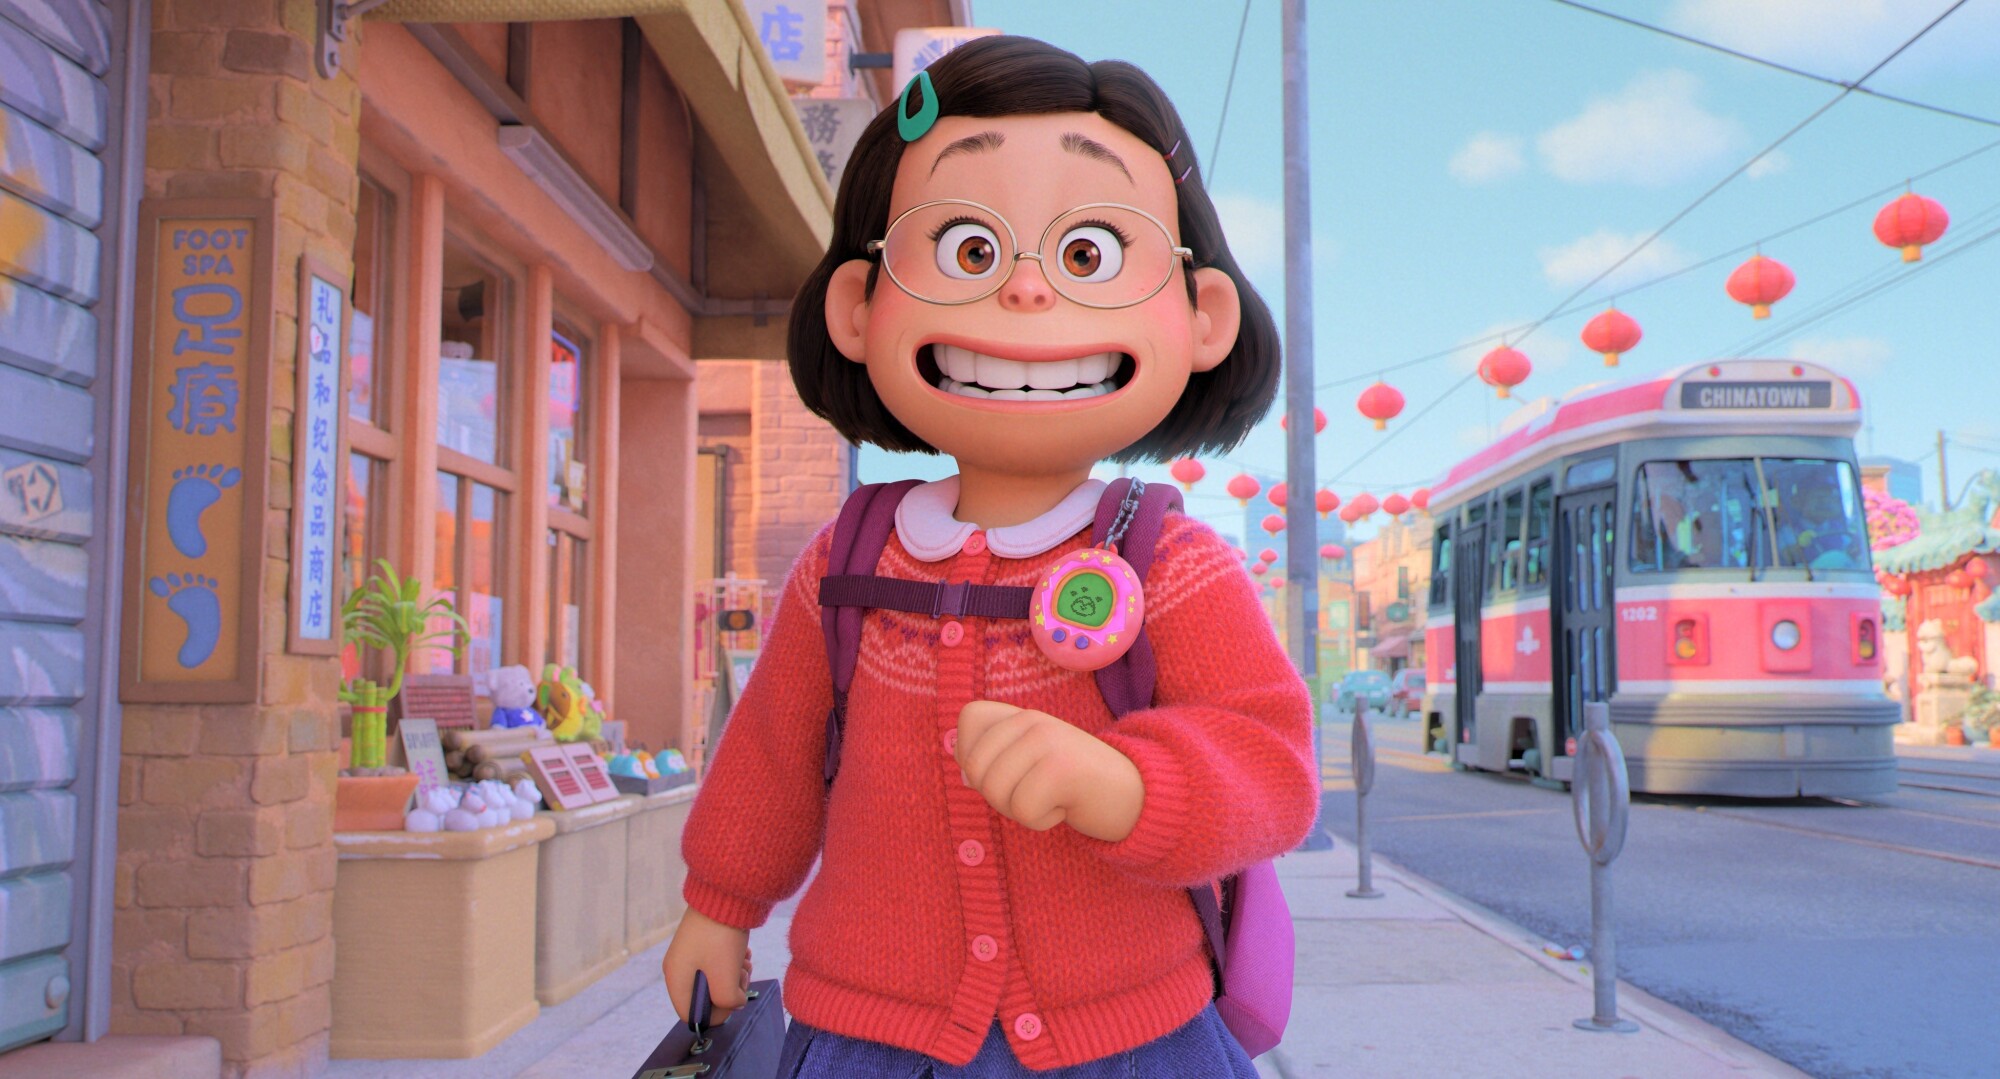 Meilin, voiced by Rosalie Chiang, in a scene from the Pixar film "Become red."